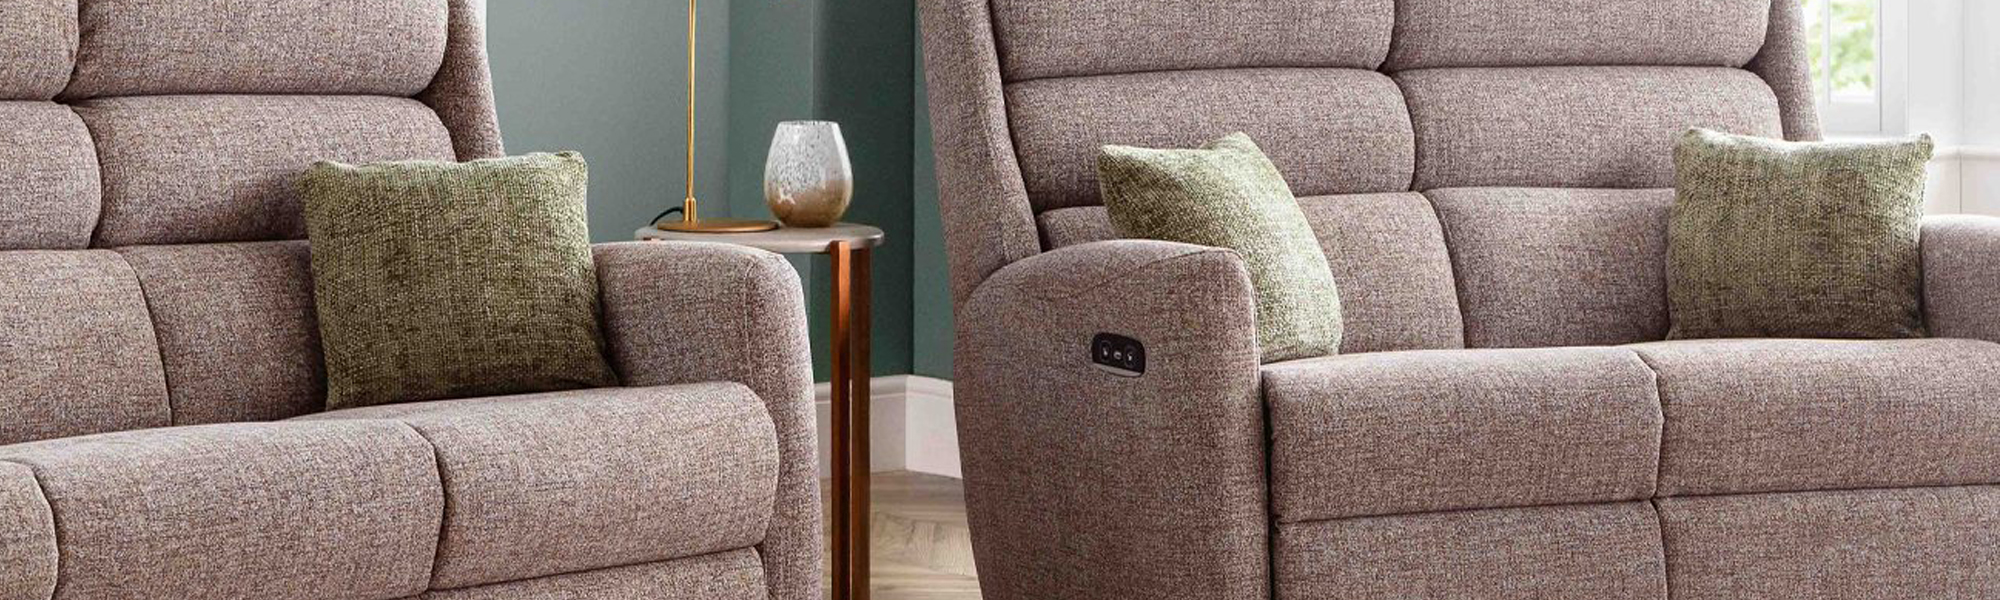 Fabric 2 Power Recliner Seater Sofas